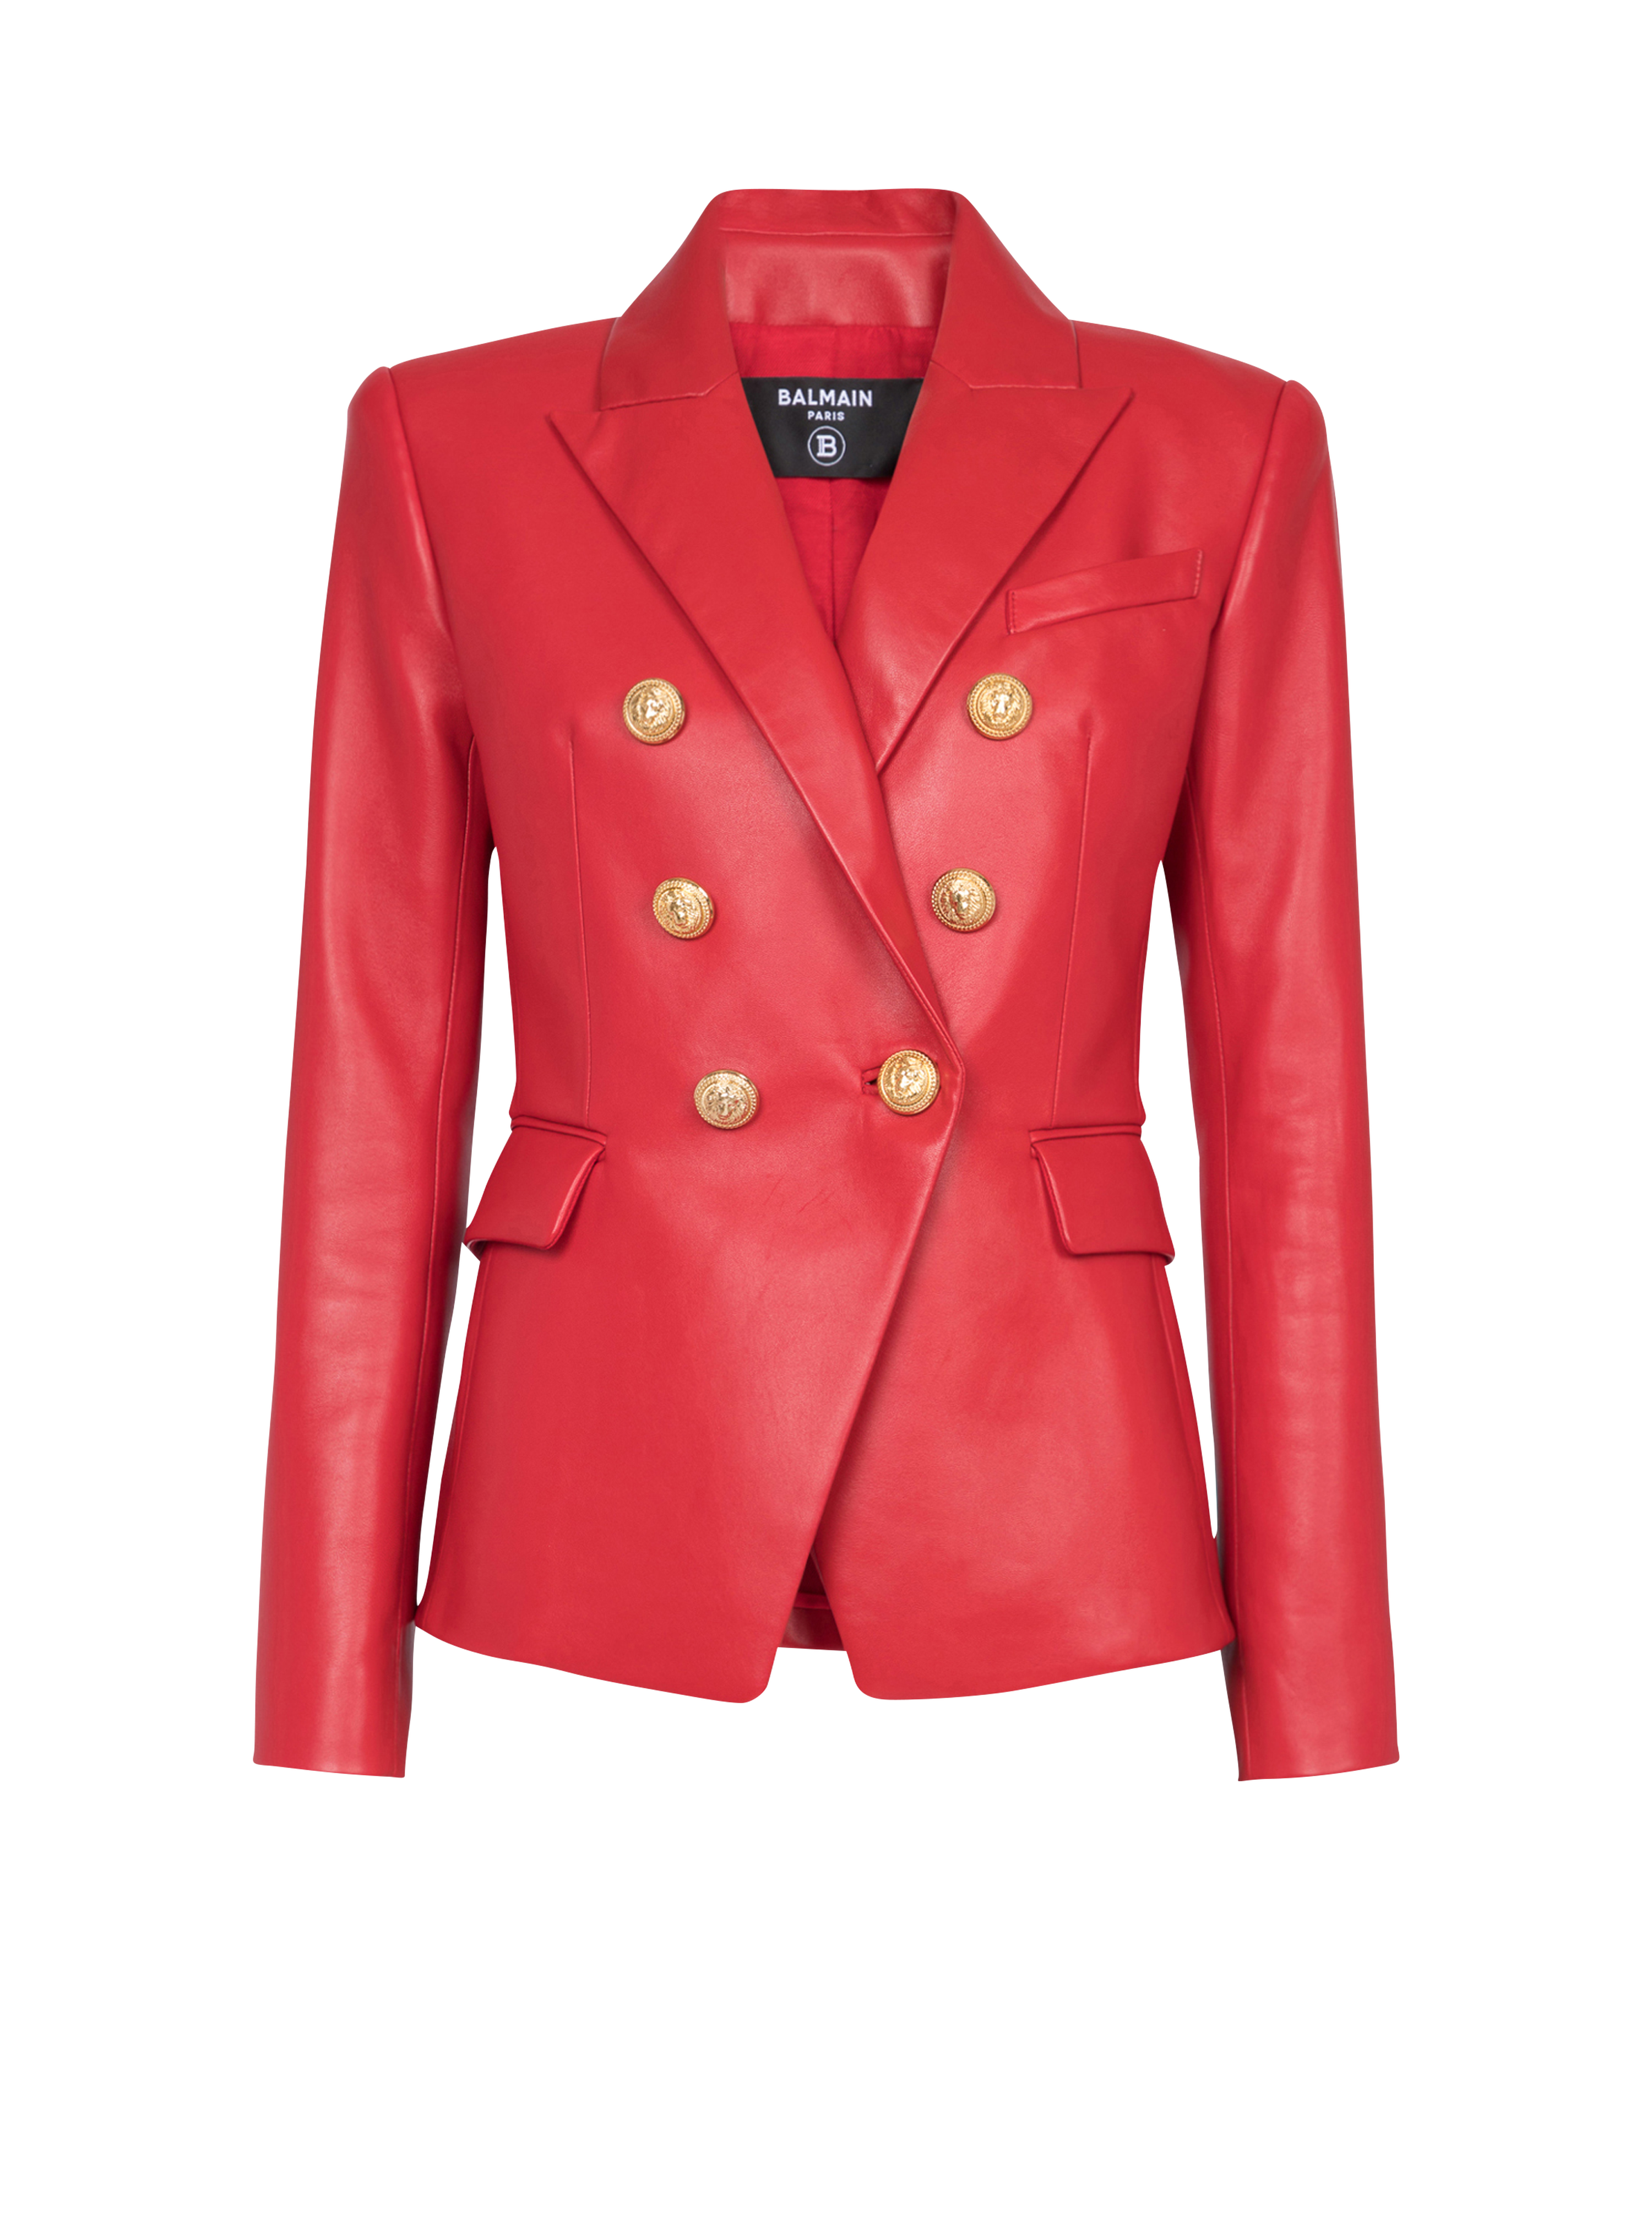 Double-breasted leather blazer, red, hi-res